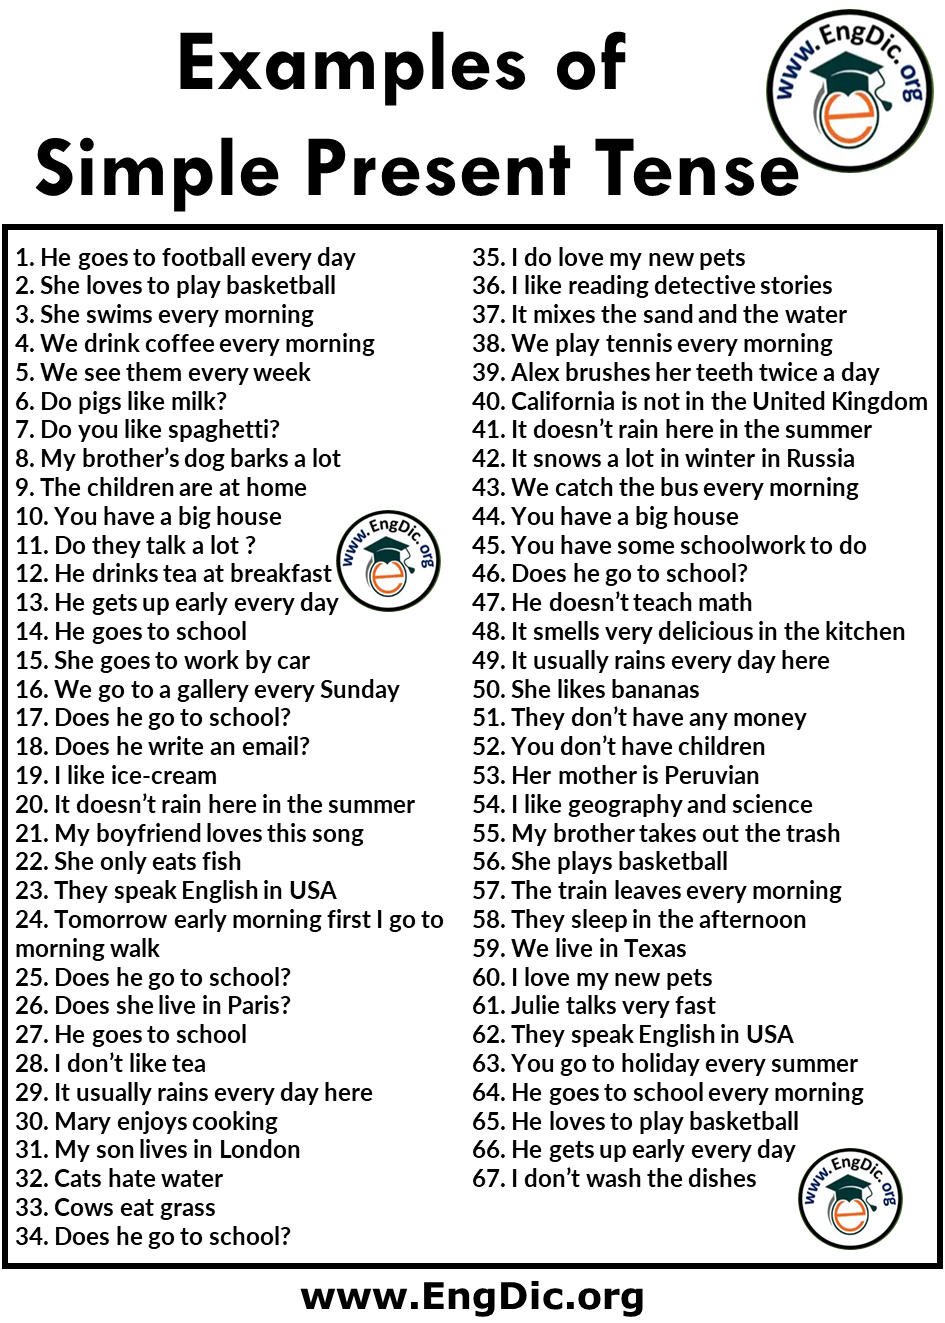 70 Examples of Simple Present Tense